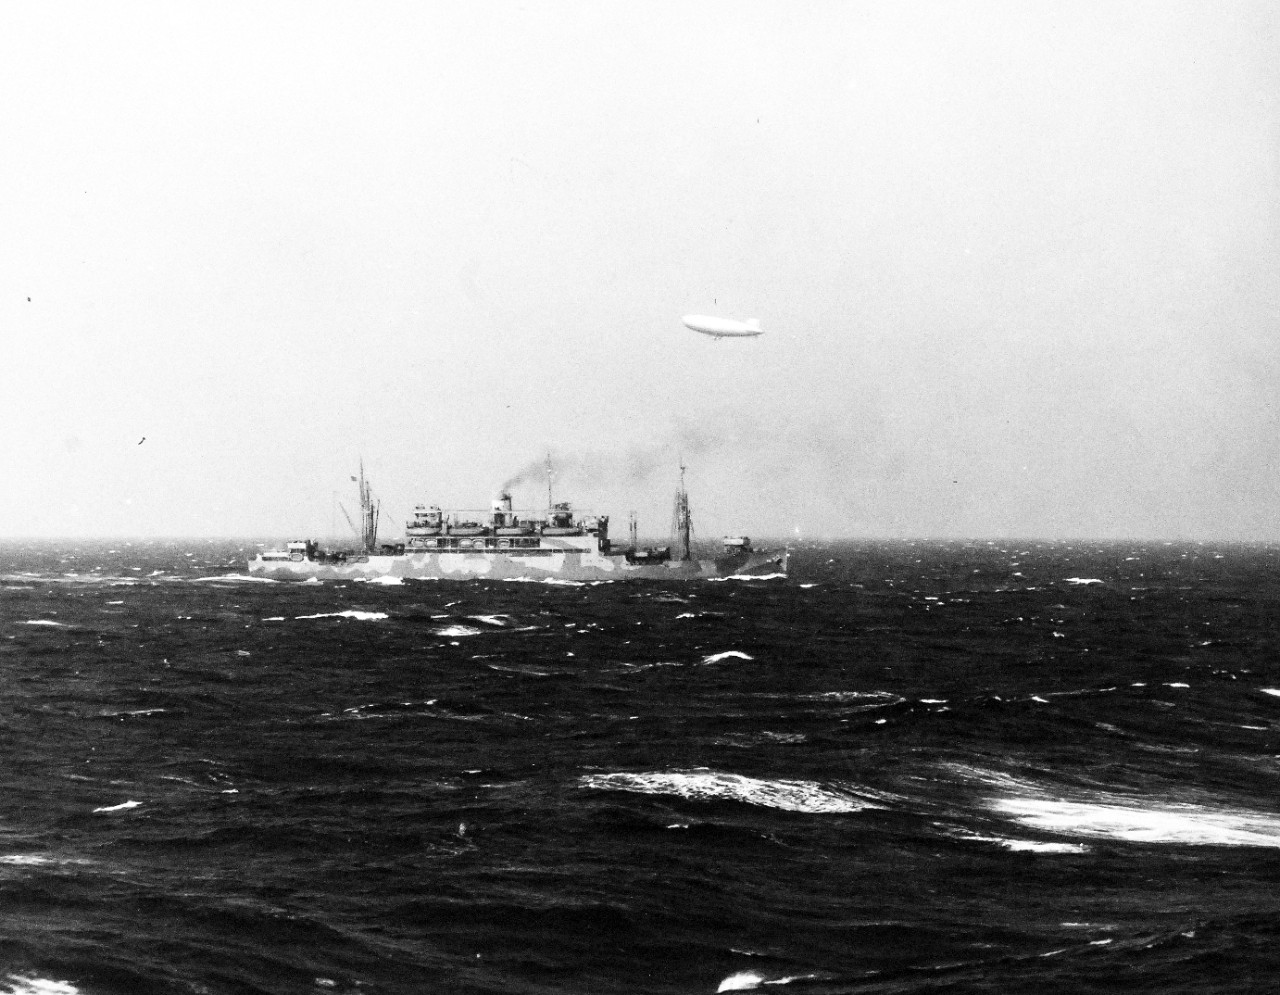 <p>80-G-2190: North Atlantic Convoy. USS McCawley (APA 4), starboard view, along with ships in a North Atlantic Convoy, probably February 1942.&nbsp;</p>
